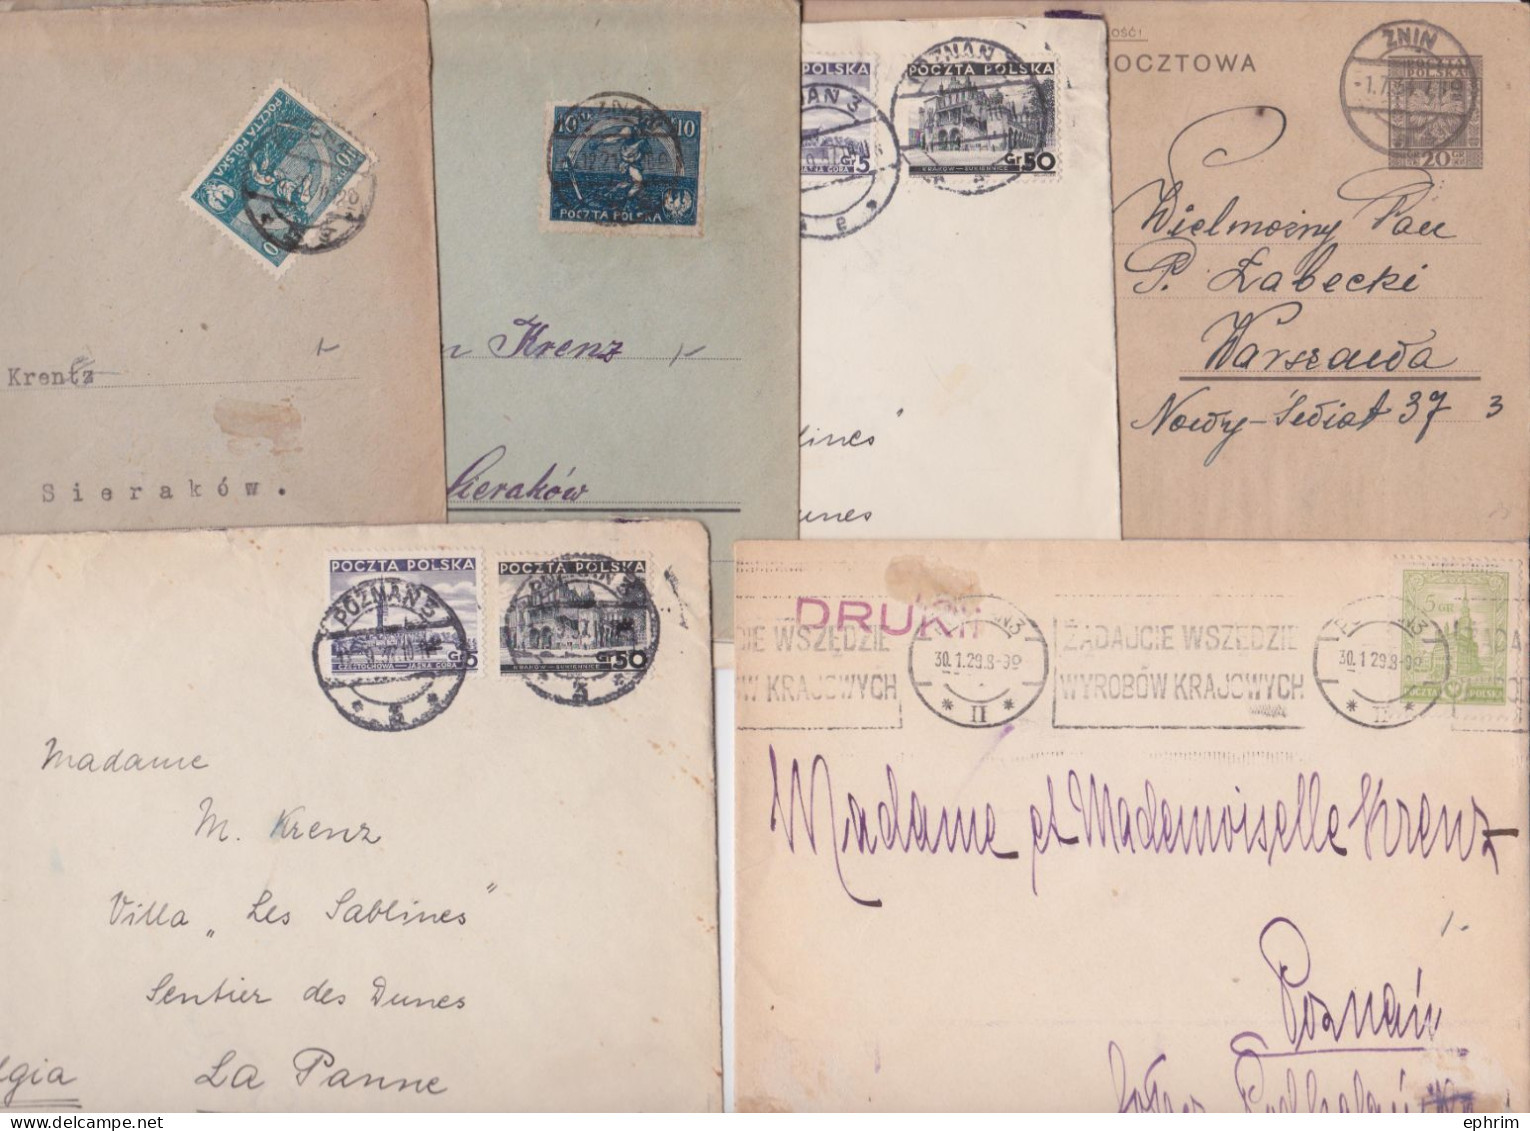 Pologne Polska Poland Polen Lot De 35 Lettres Anciennes Timbre Stamp Old Mail Cover Before 1950 Alte Brief Briefmarke - Covers & Documents